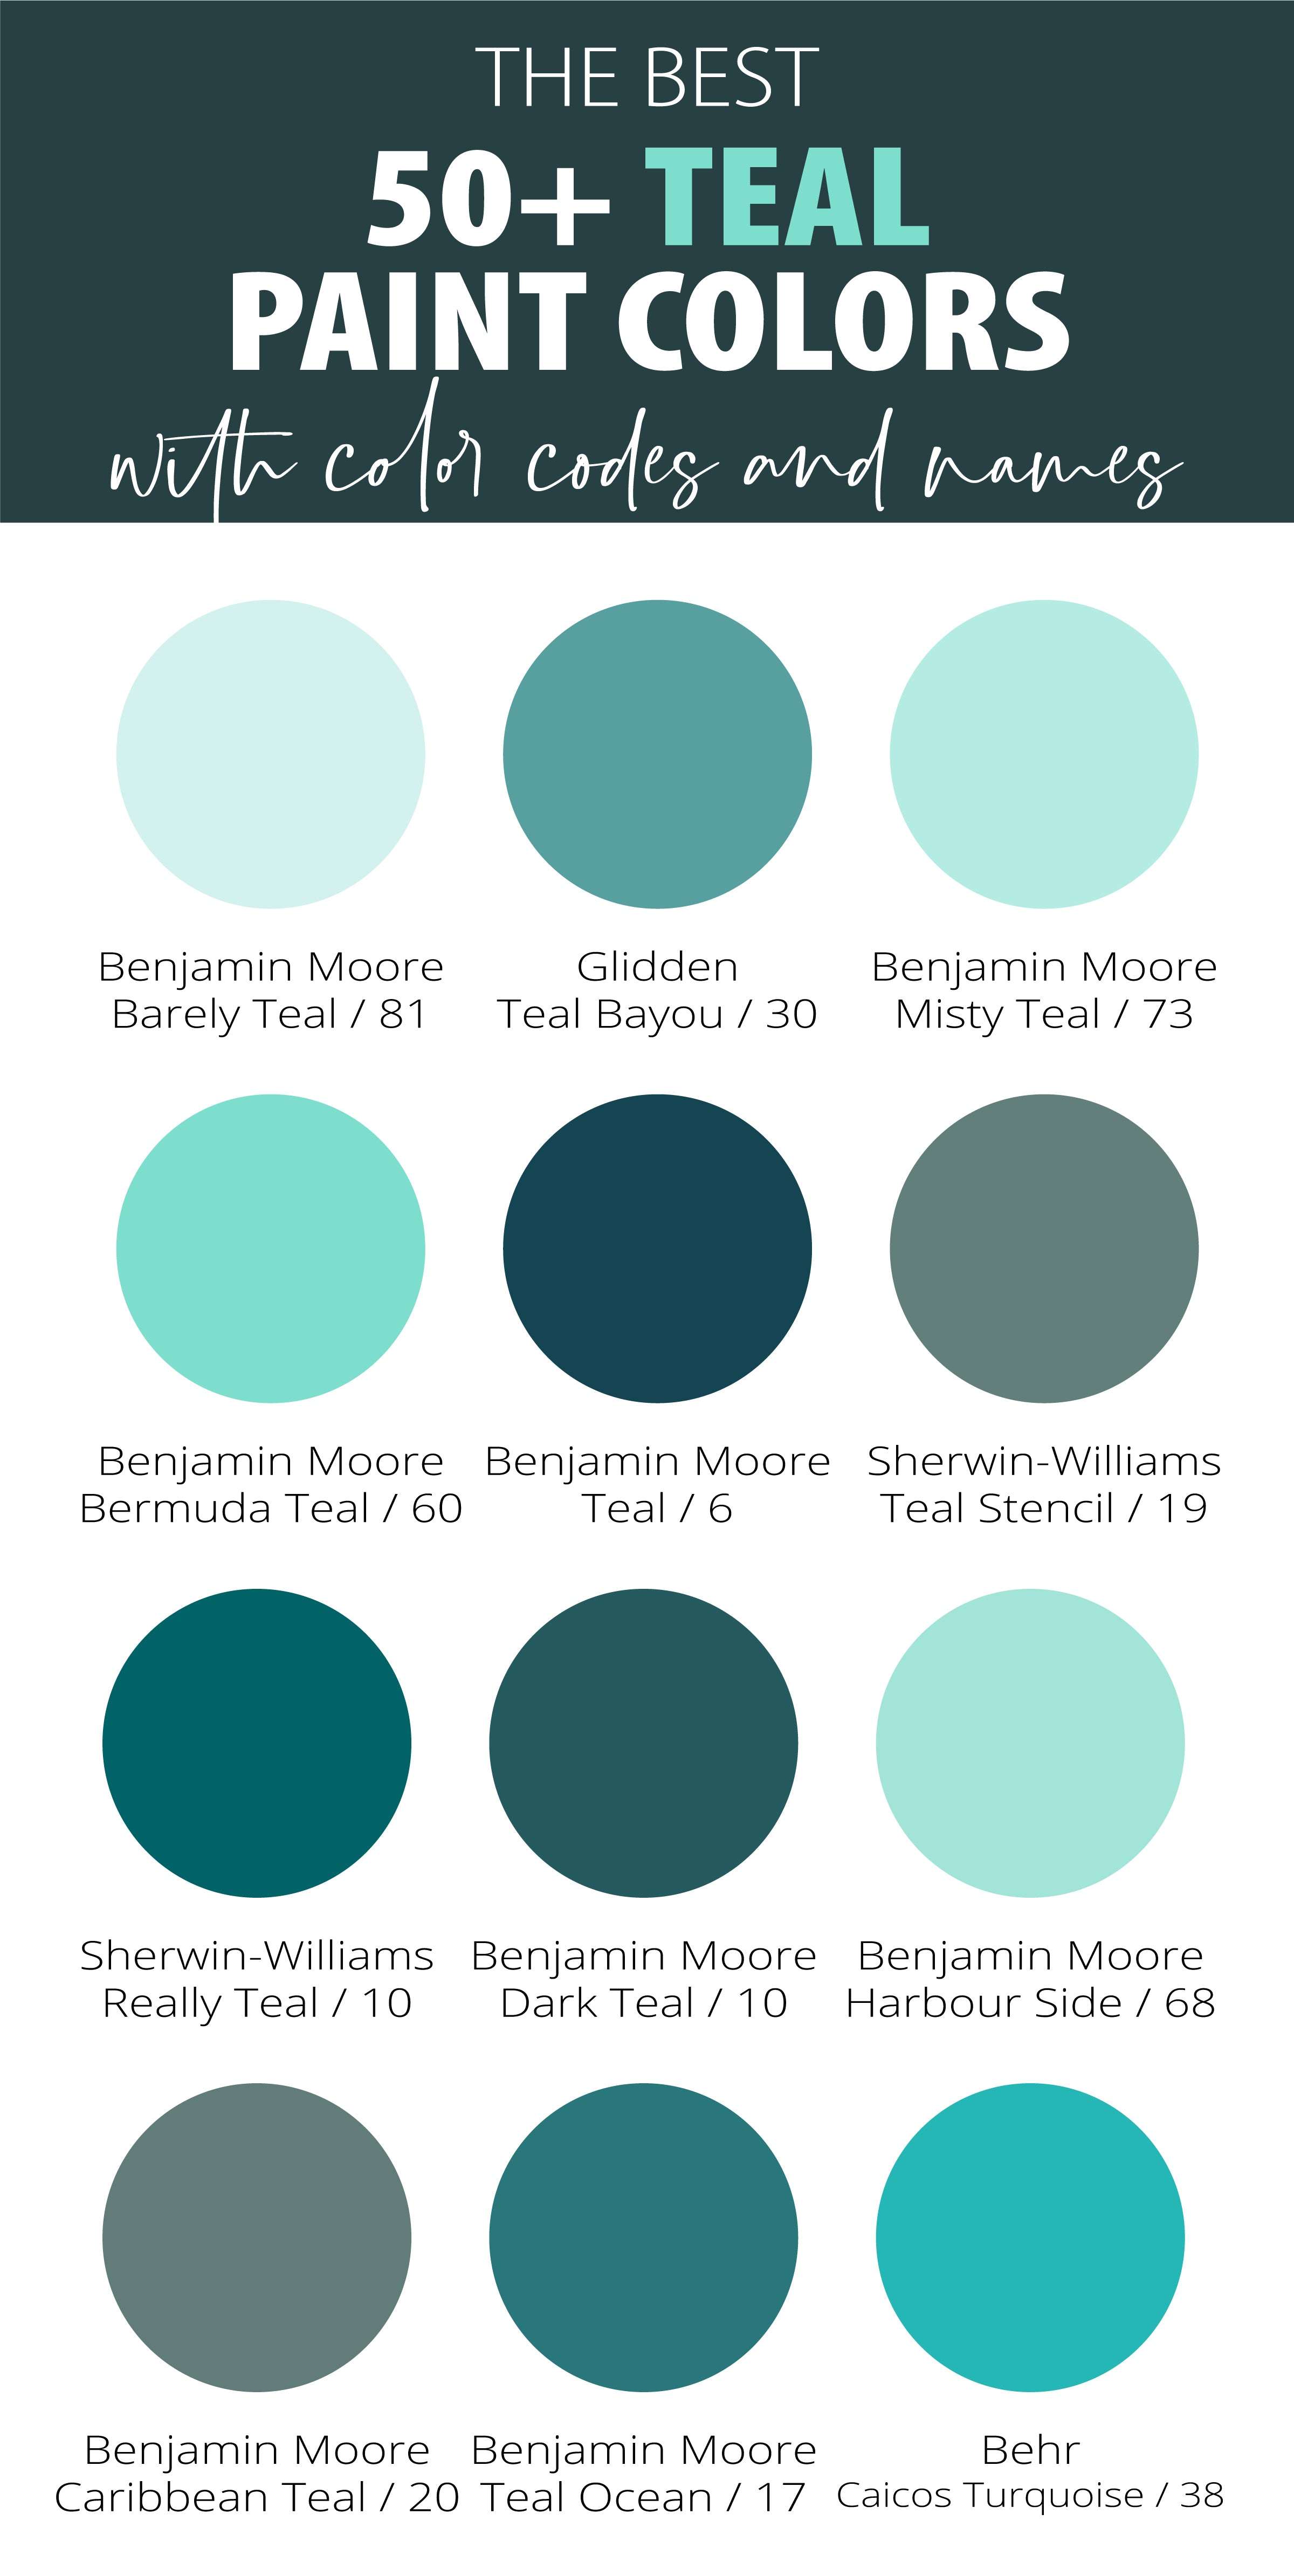 Best-Teal-Paint-Colors-with-Names-Colors-and-LRV-values-pinterest-tall